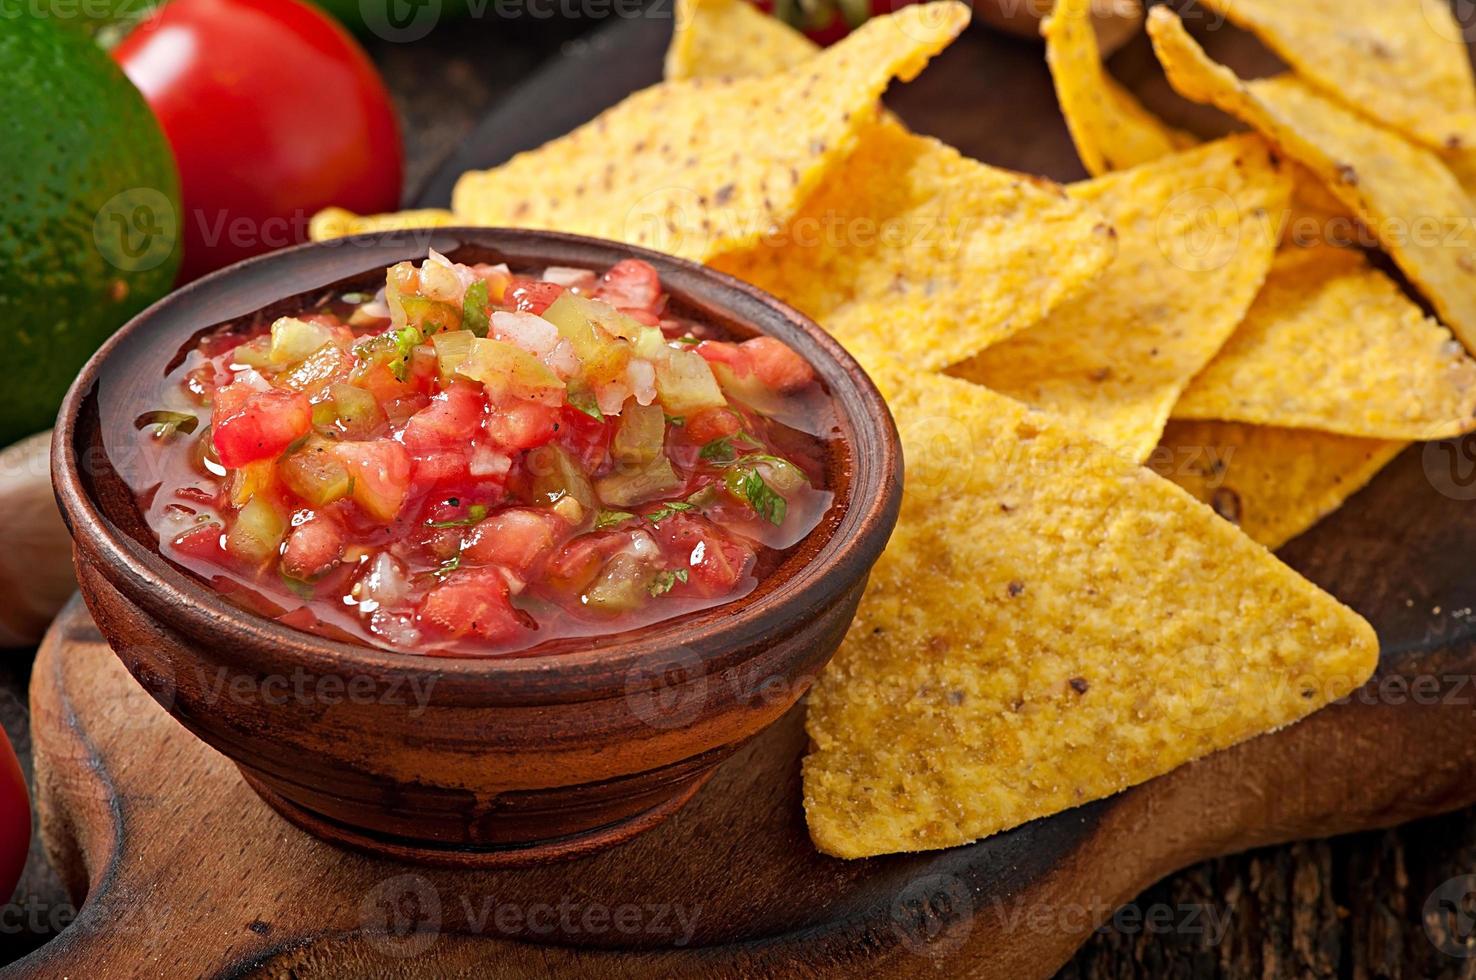 Mexican nacho chips and salsa dip in  bowl on  wooden background photo